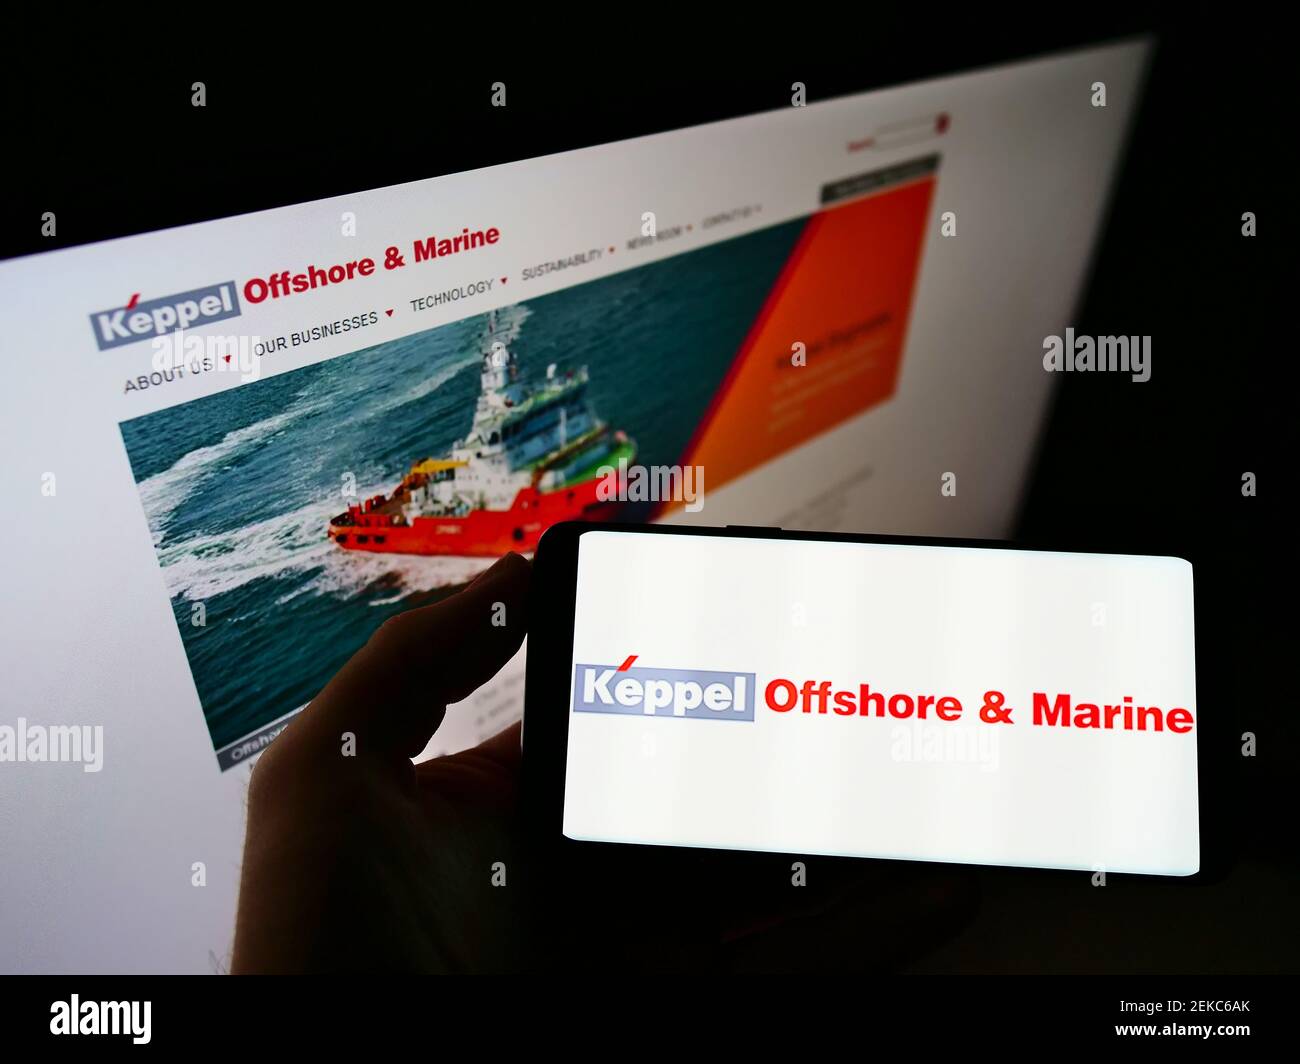 Person holding cellphone with business logo of Singaporean company Keppel Offshore and Marine on screen in front of website. Focus on phone display. Stock Photo